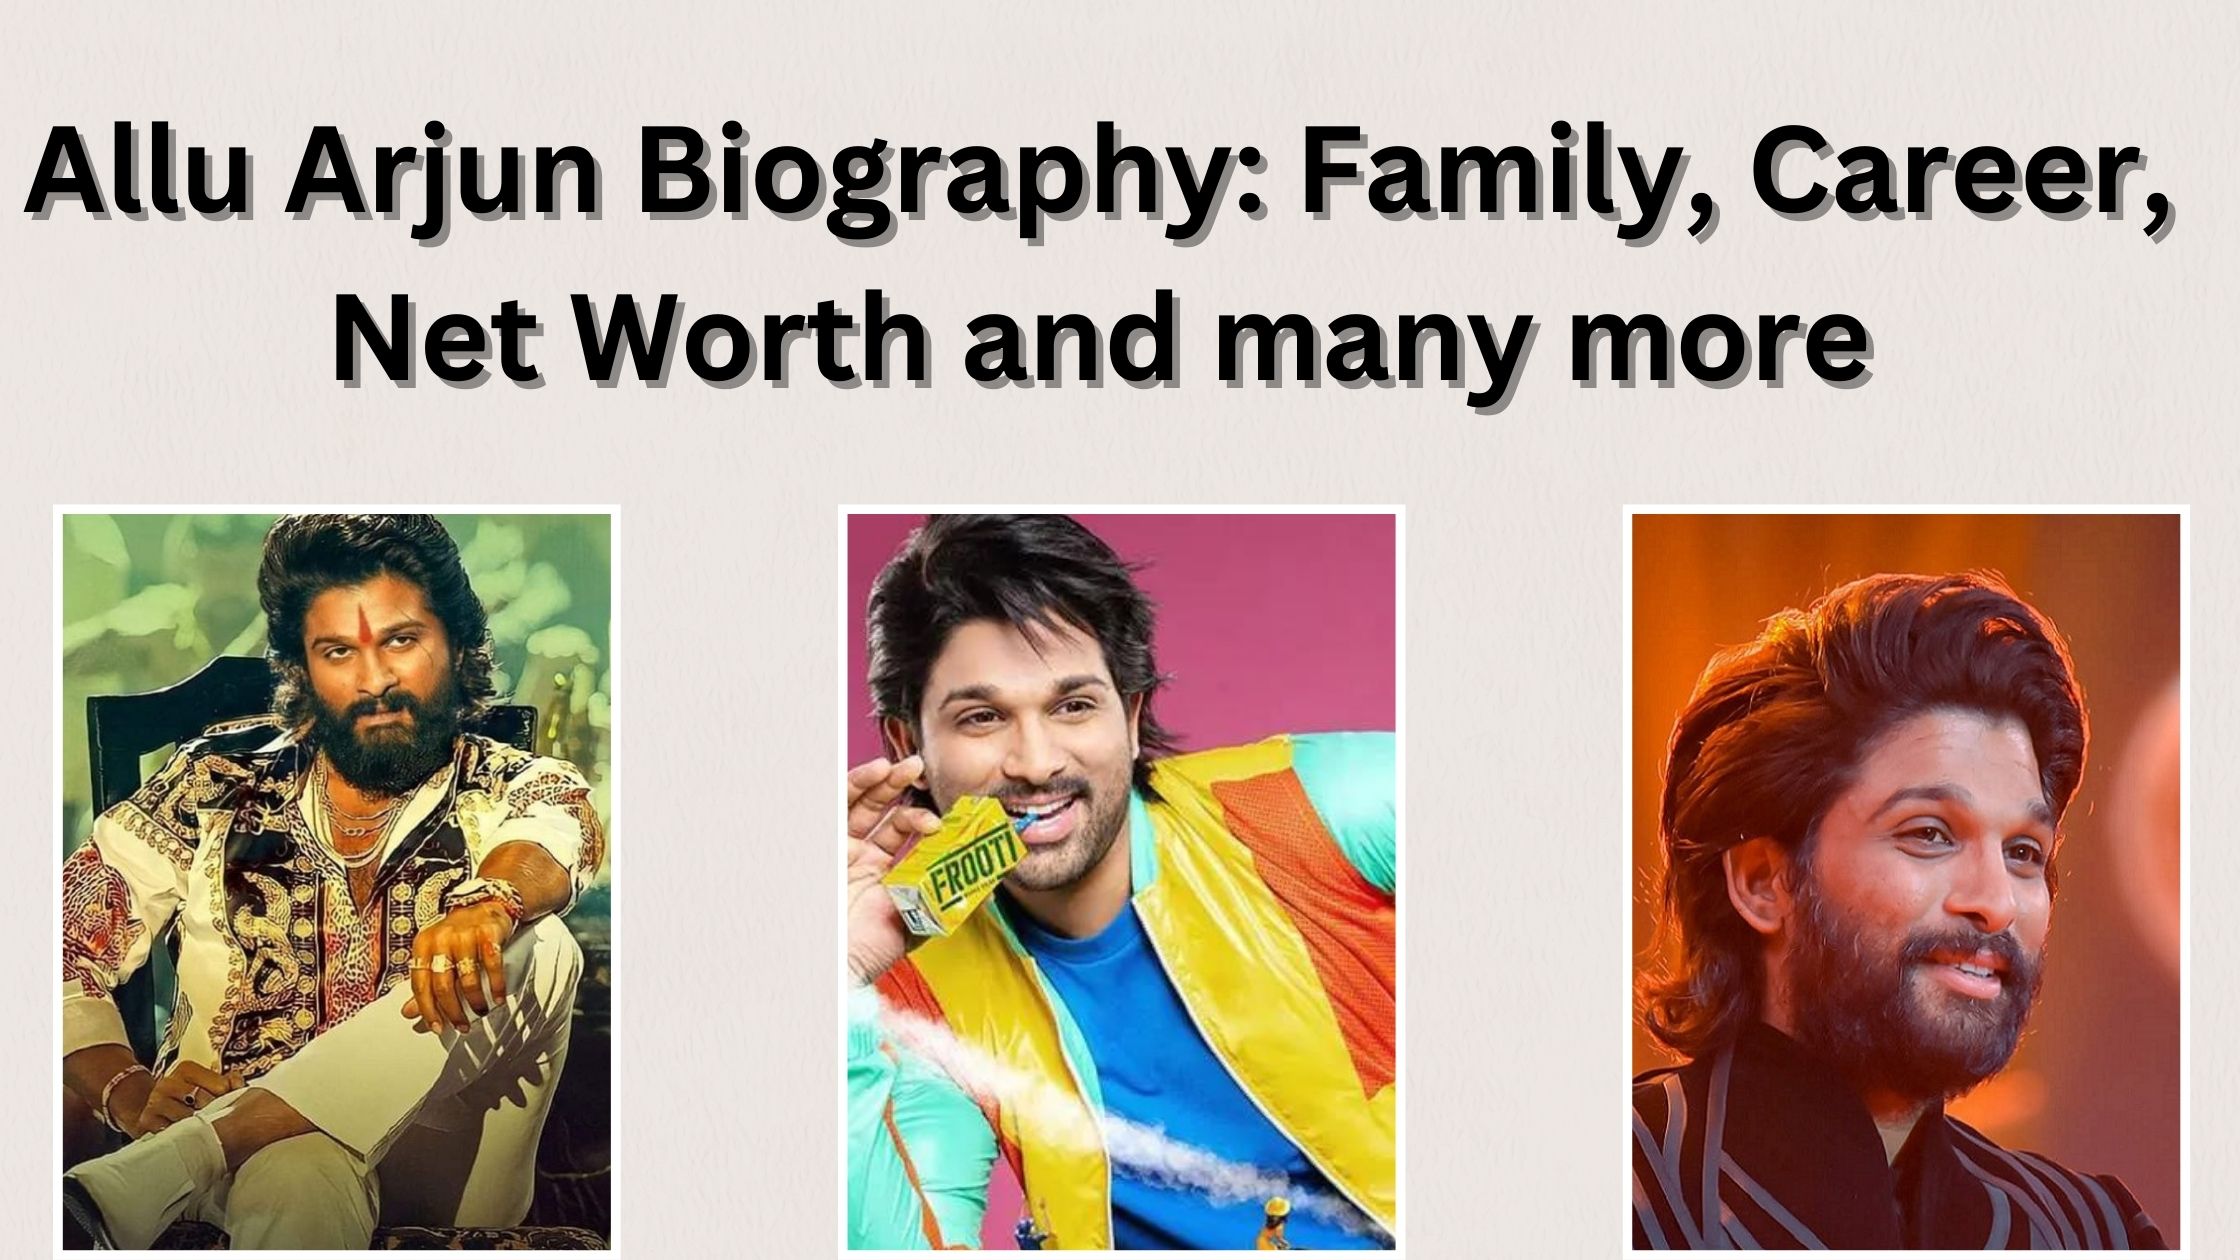 Allu Arjun Biography: Family, Career, Net Worth and many more